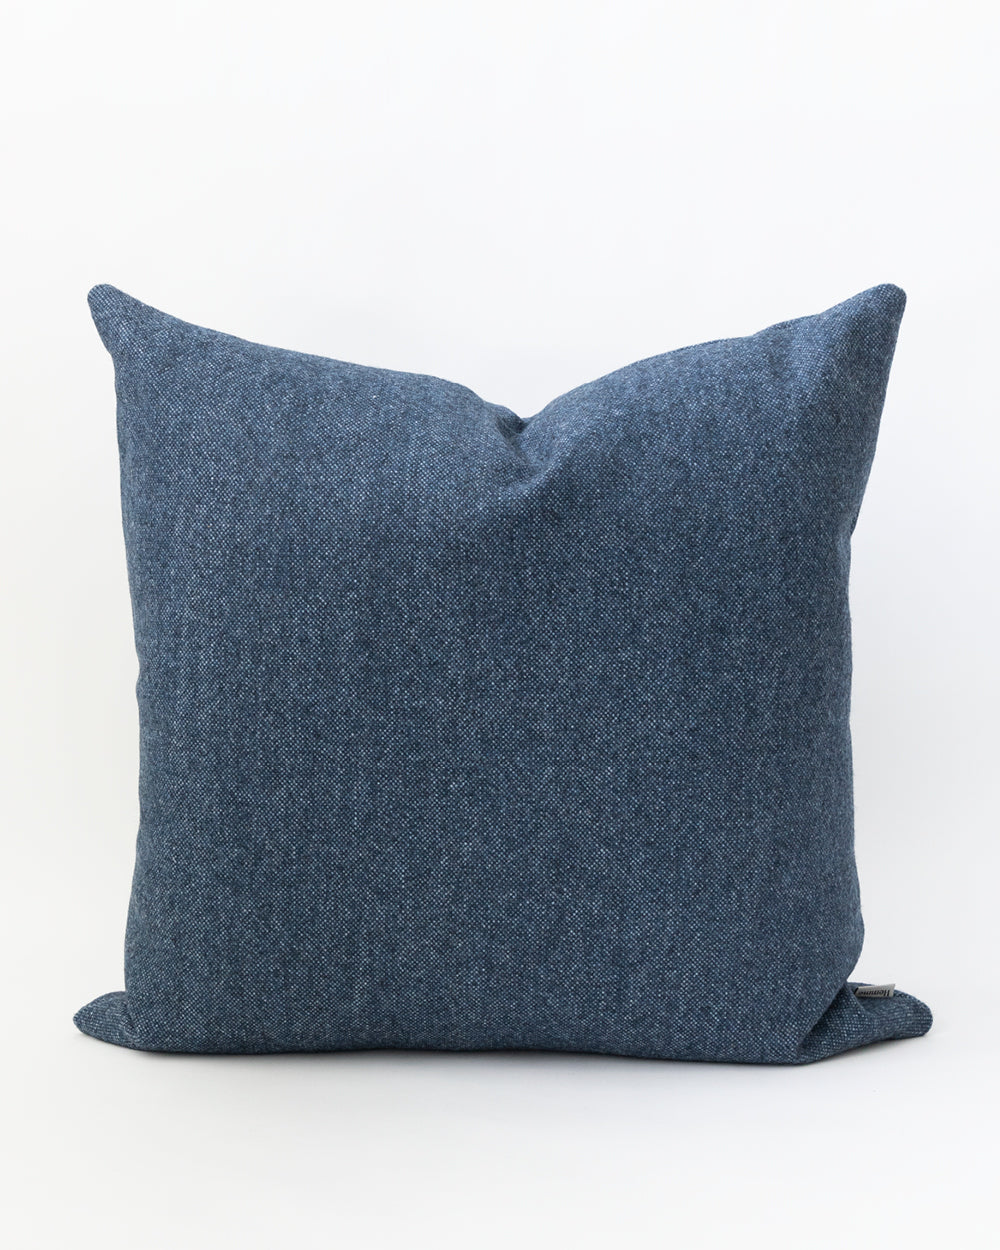 Square inky blue wool pillow.